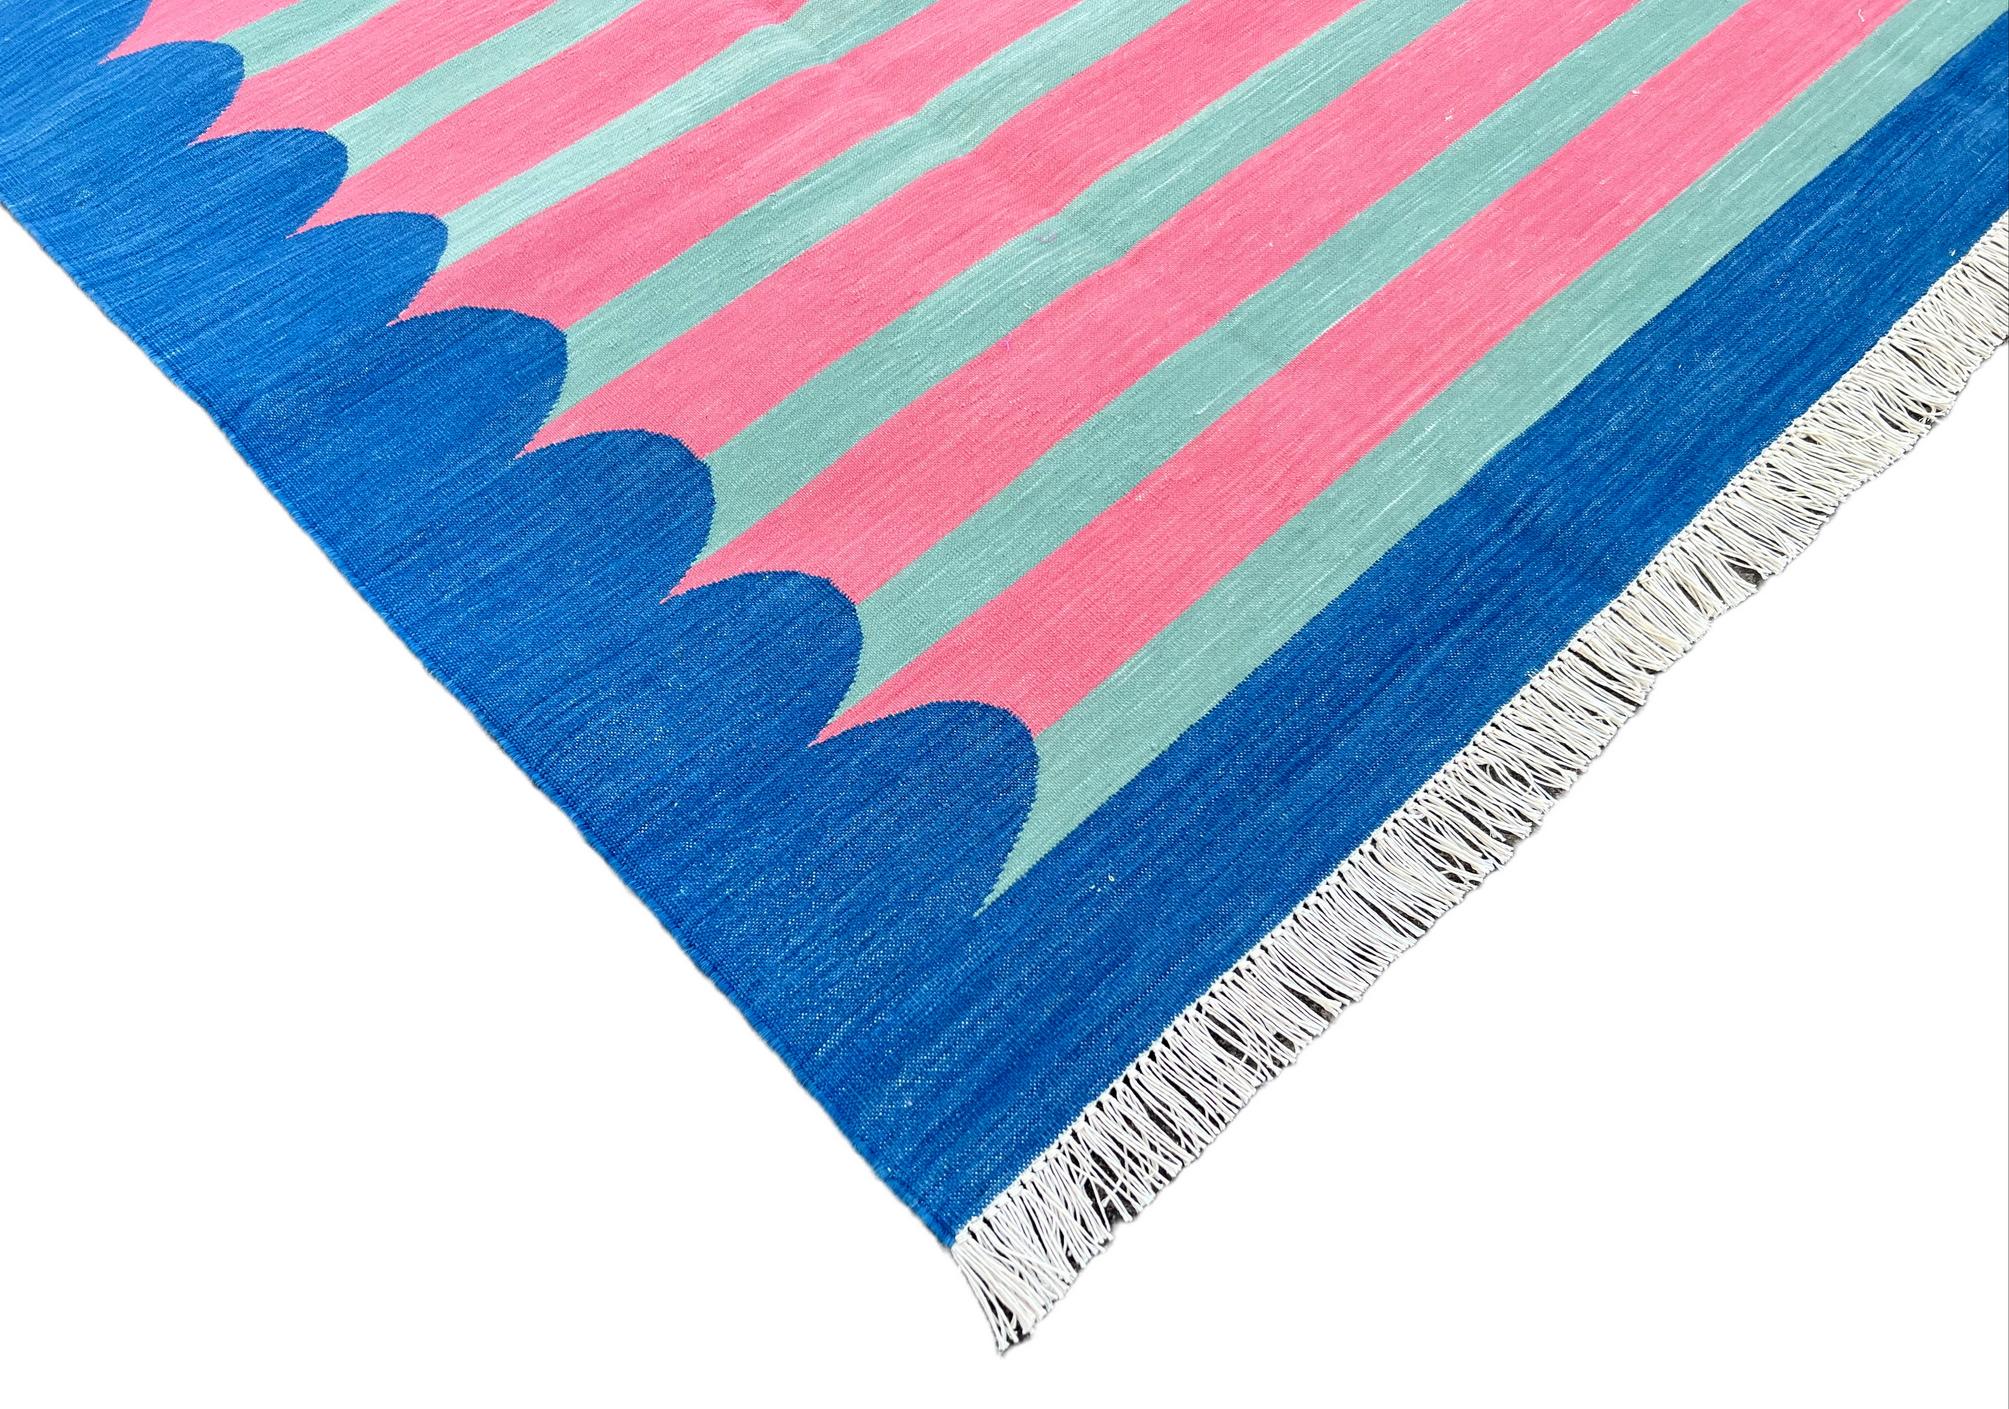 Mid-Century Modern Handmade Cotton Area Flat Weave Rug, Pink And Blue Scalloped Striped Dhurrie Rug For Sale